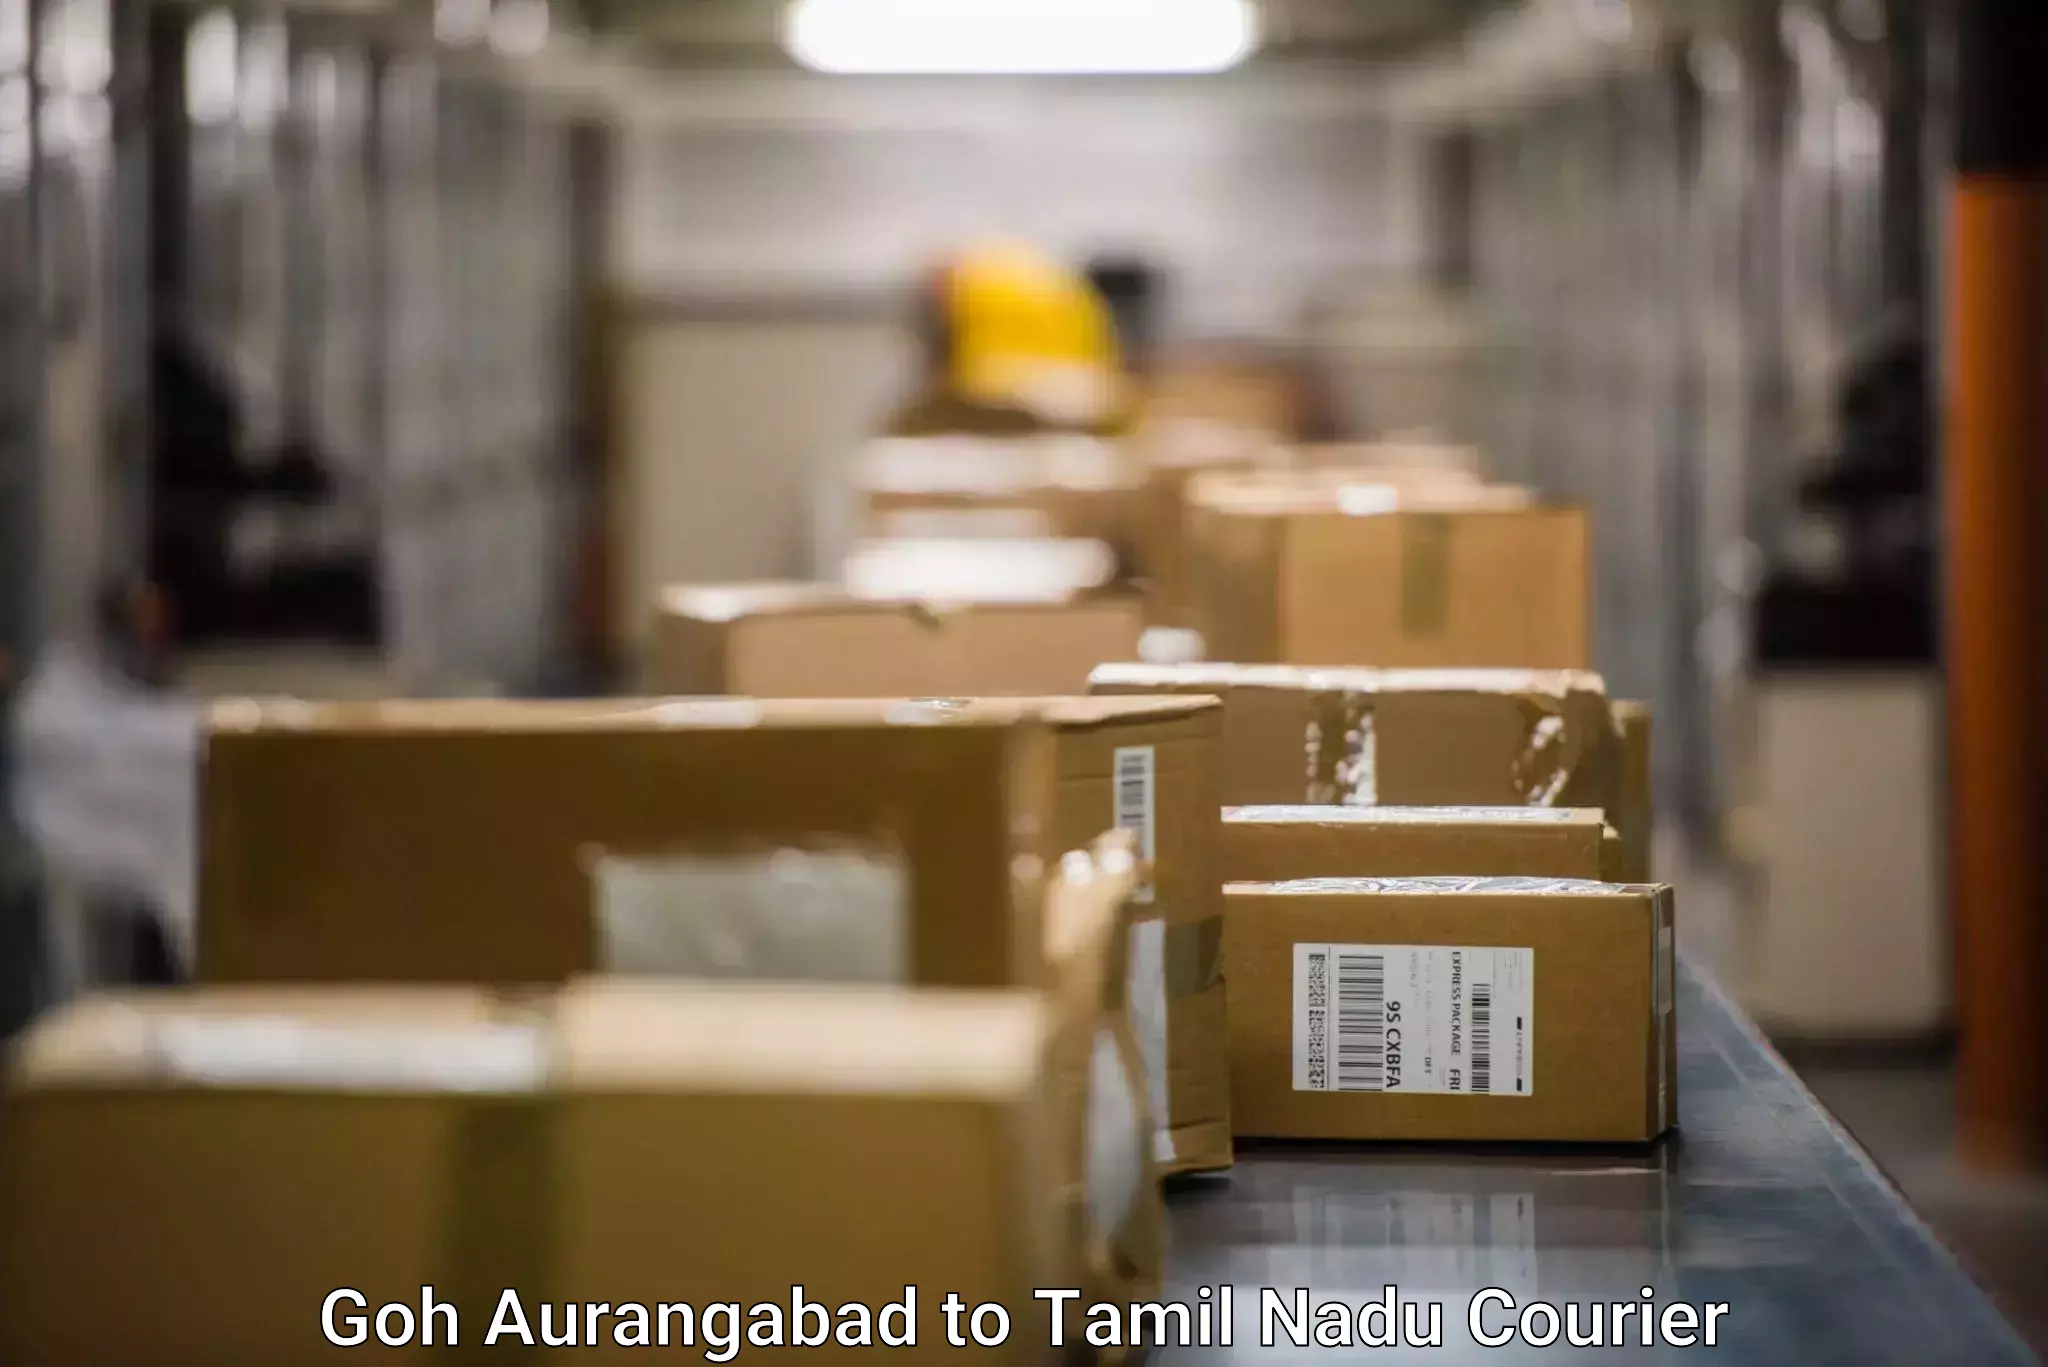 Integrated shipping systems in Goh Aurangabad to Tamil Nadu